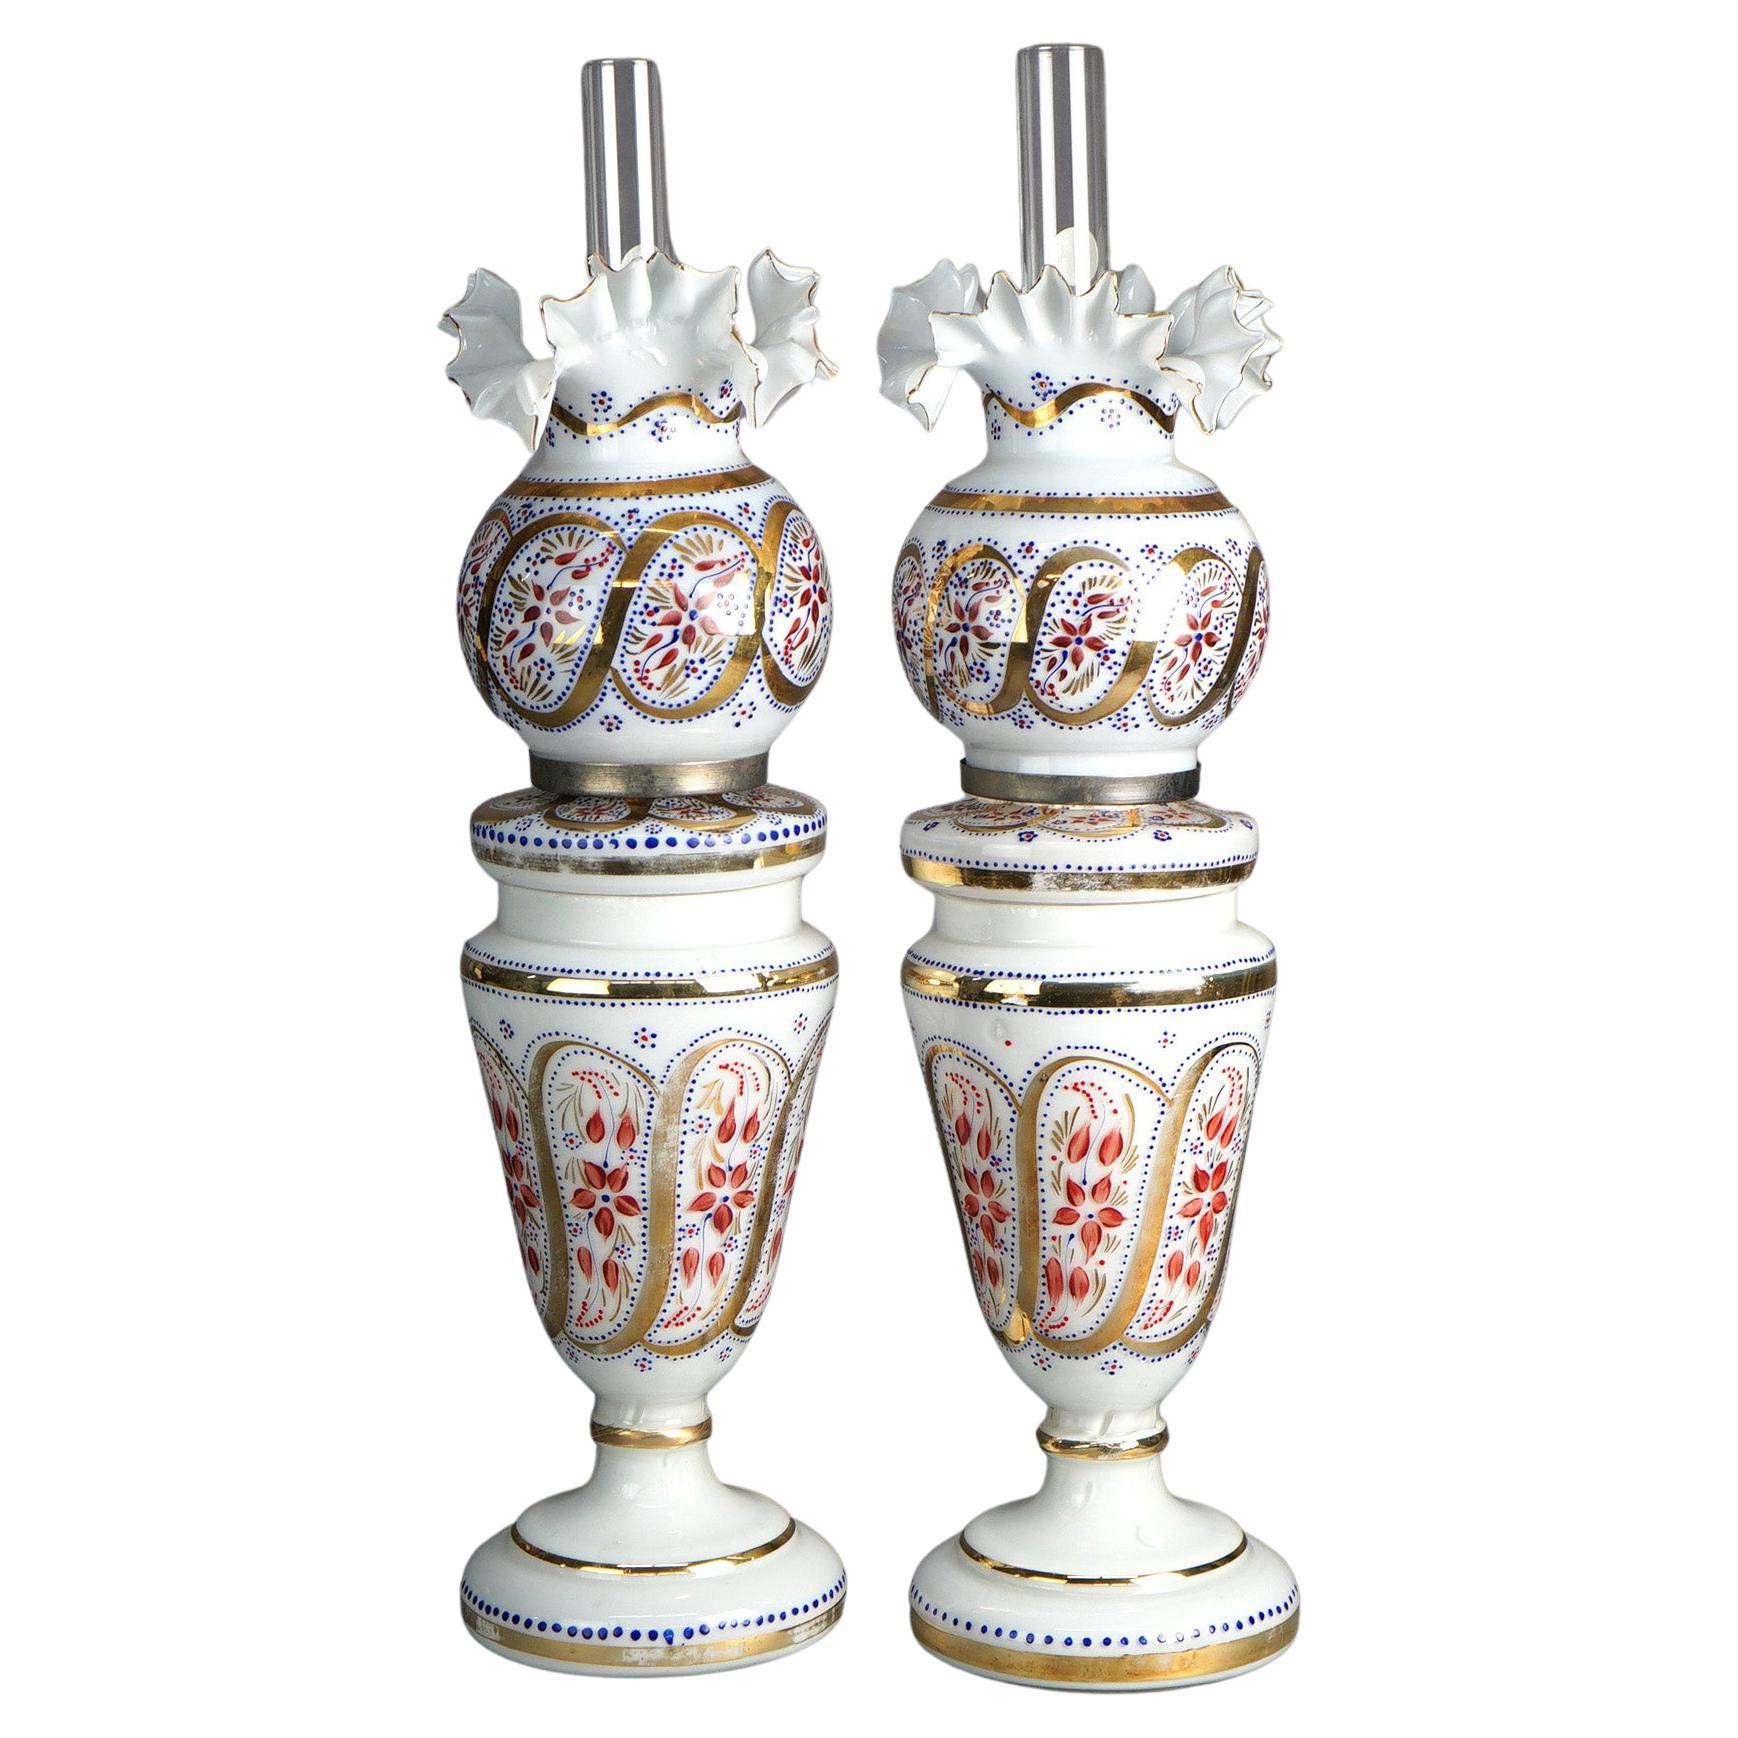 Antique Pair Opaline Floral Enameled Hand Painted Lamps With Handkerchief Shades For Sale